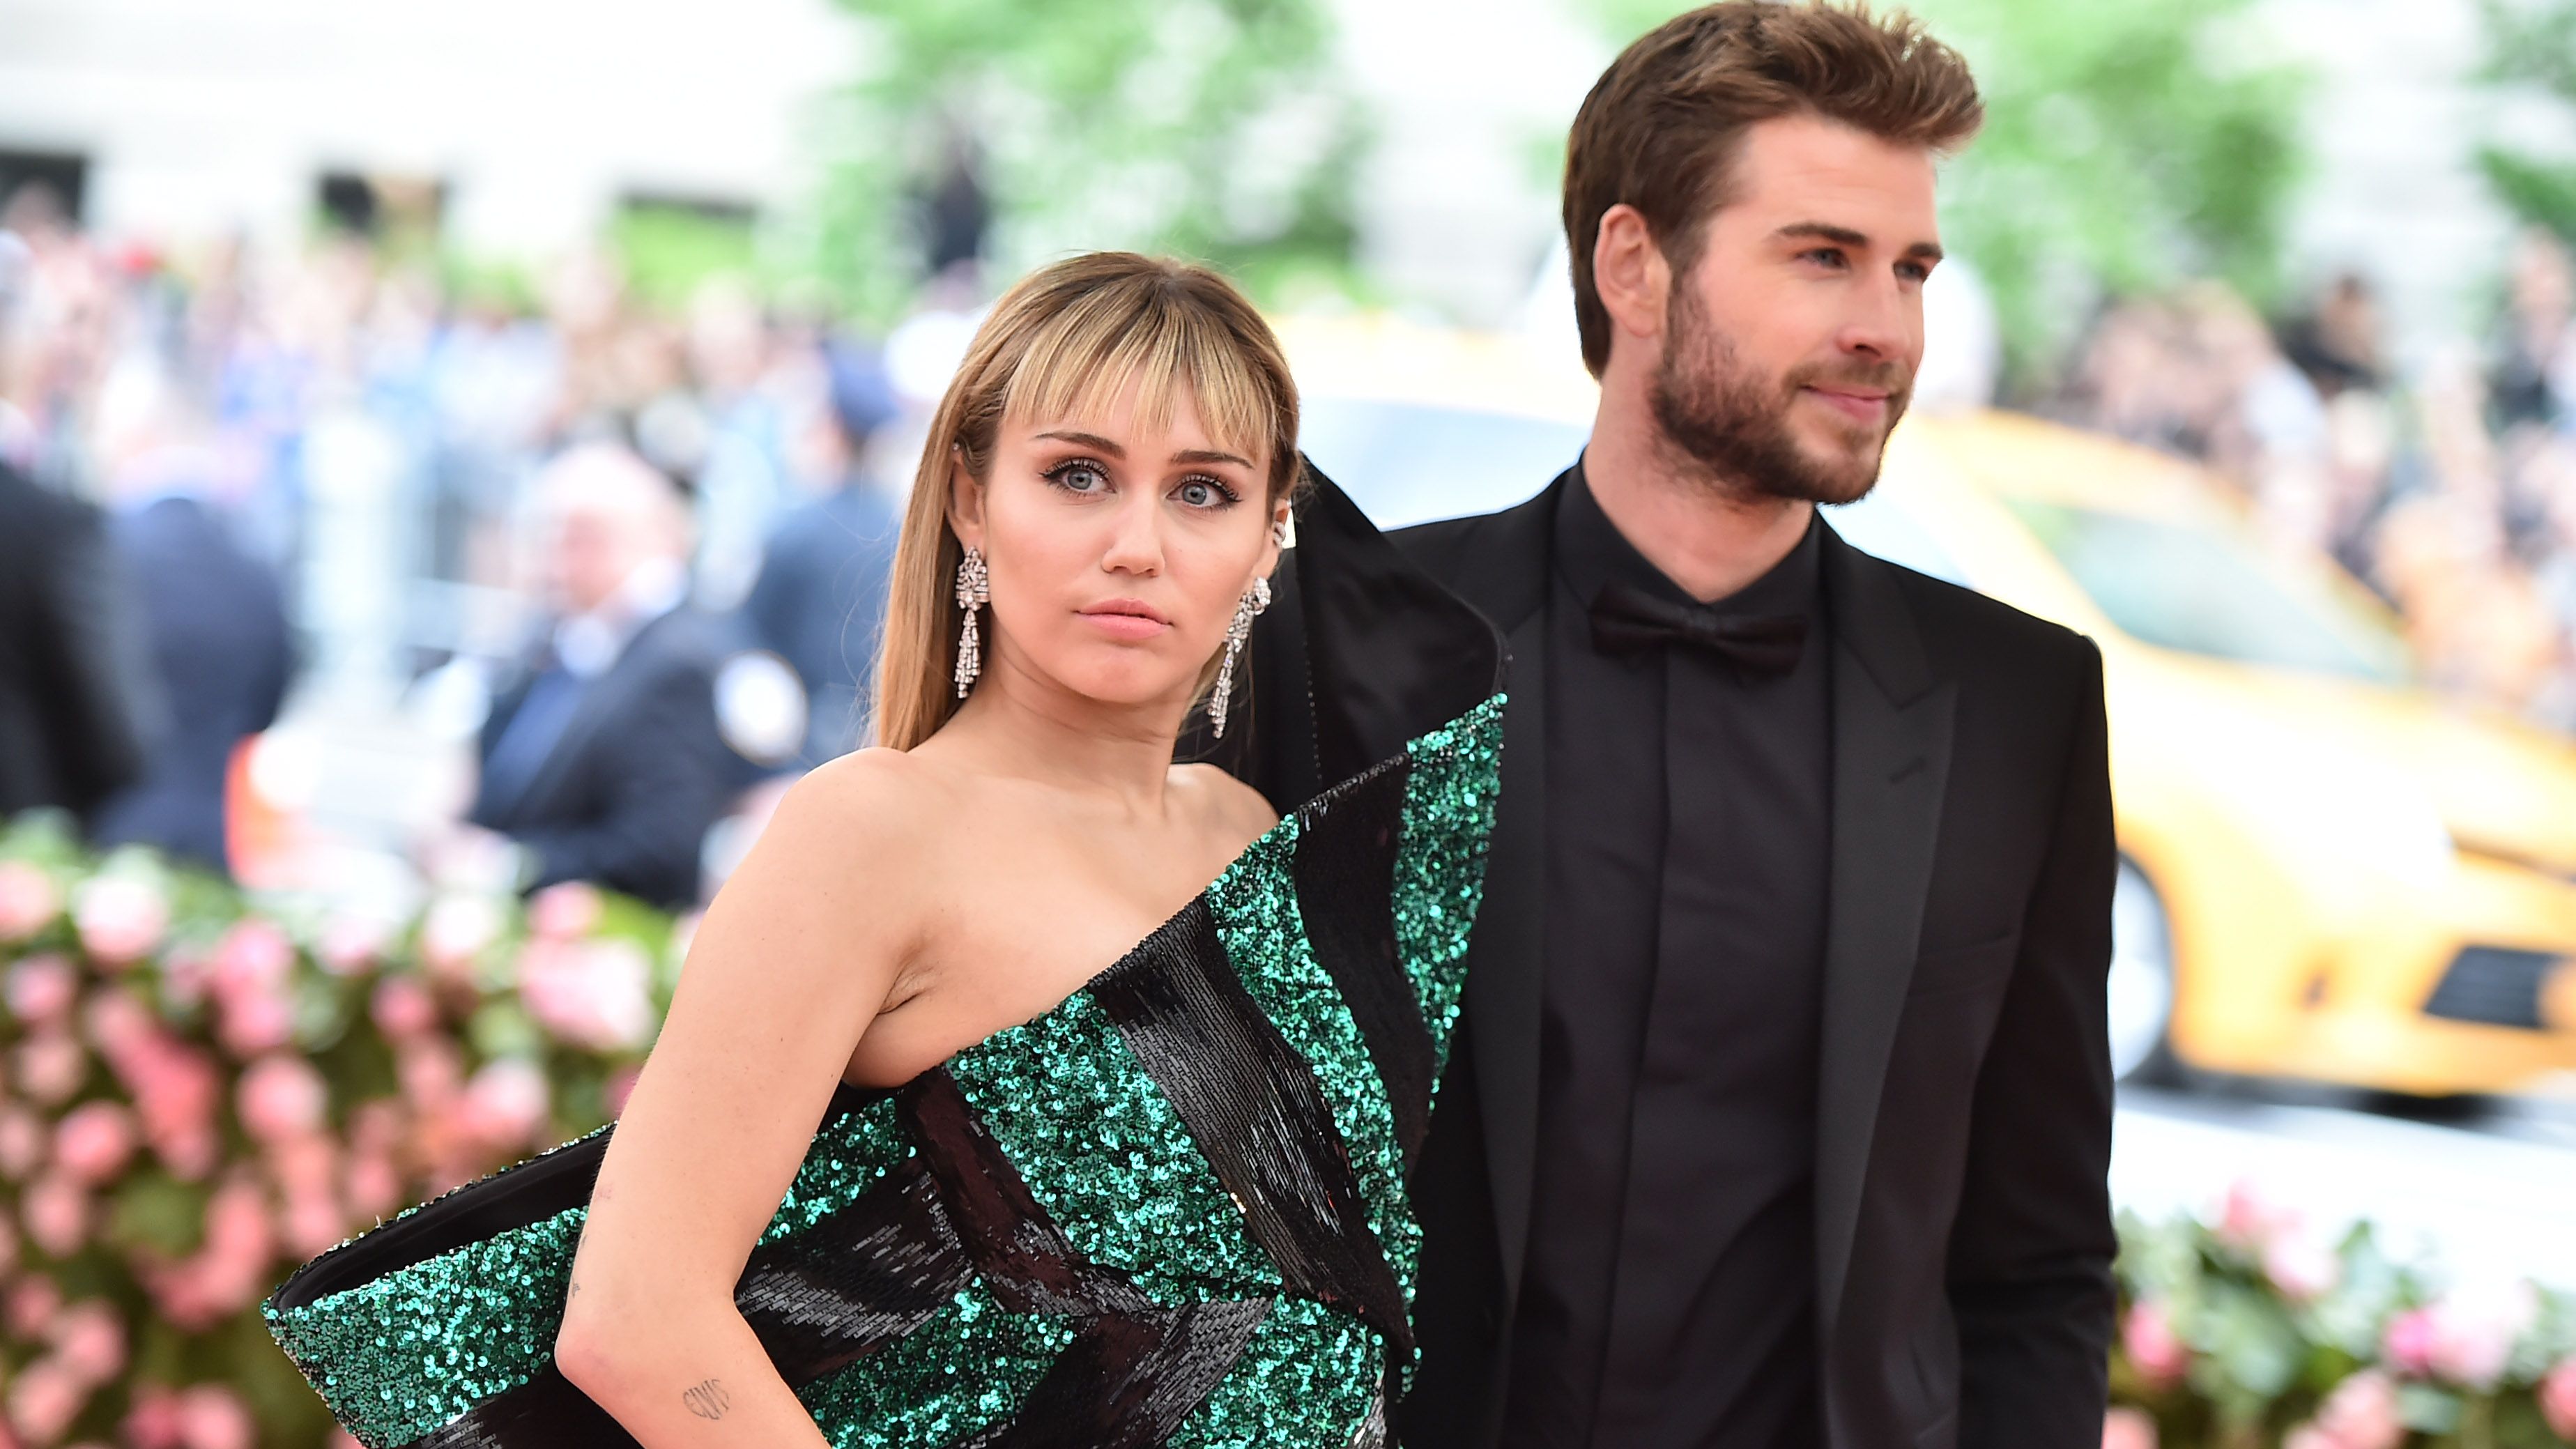 Miley Cyrus Creampie Porn - Watch Miley Cyrus Call Liam Hemsworth Marriage a 'F*cking Disaster'